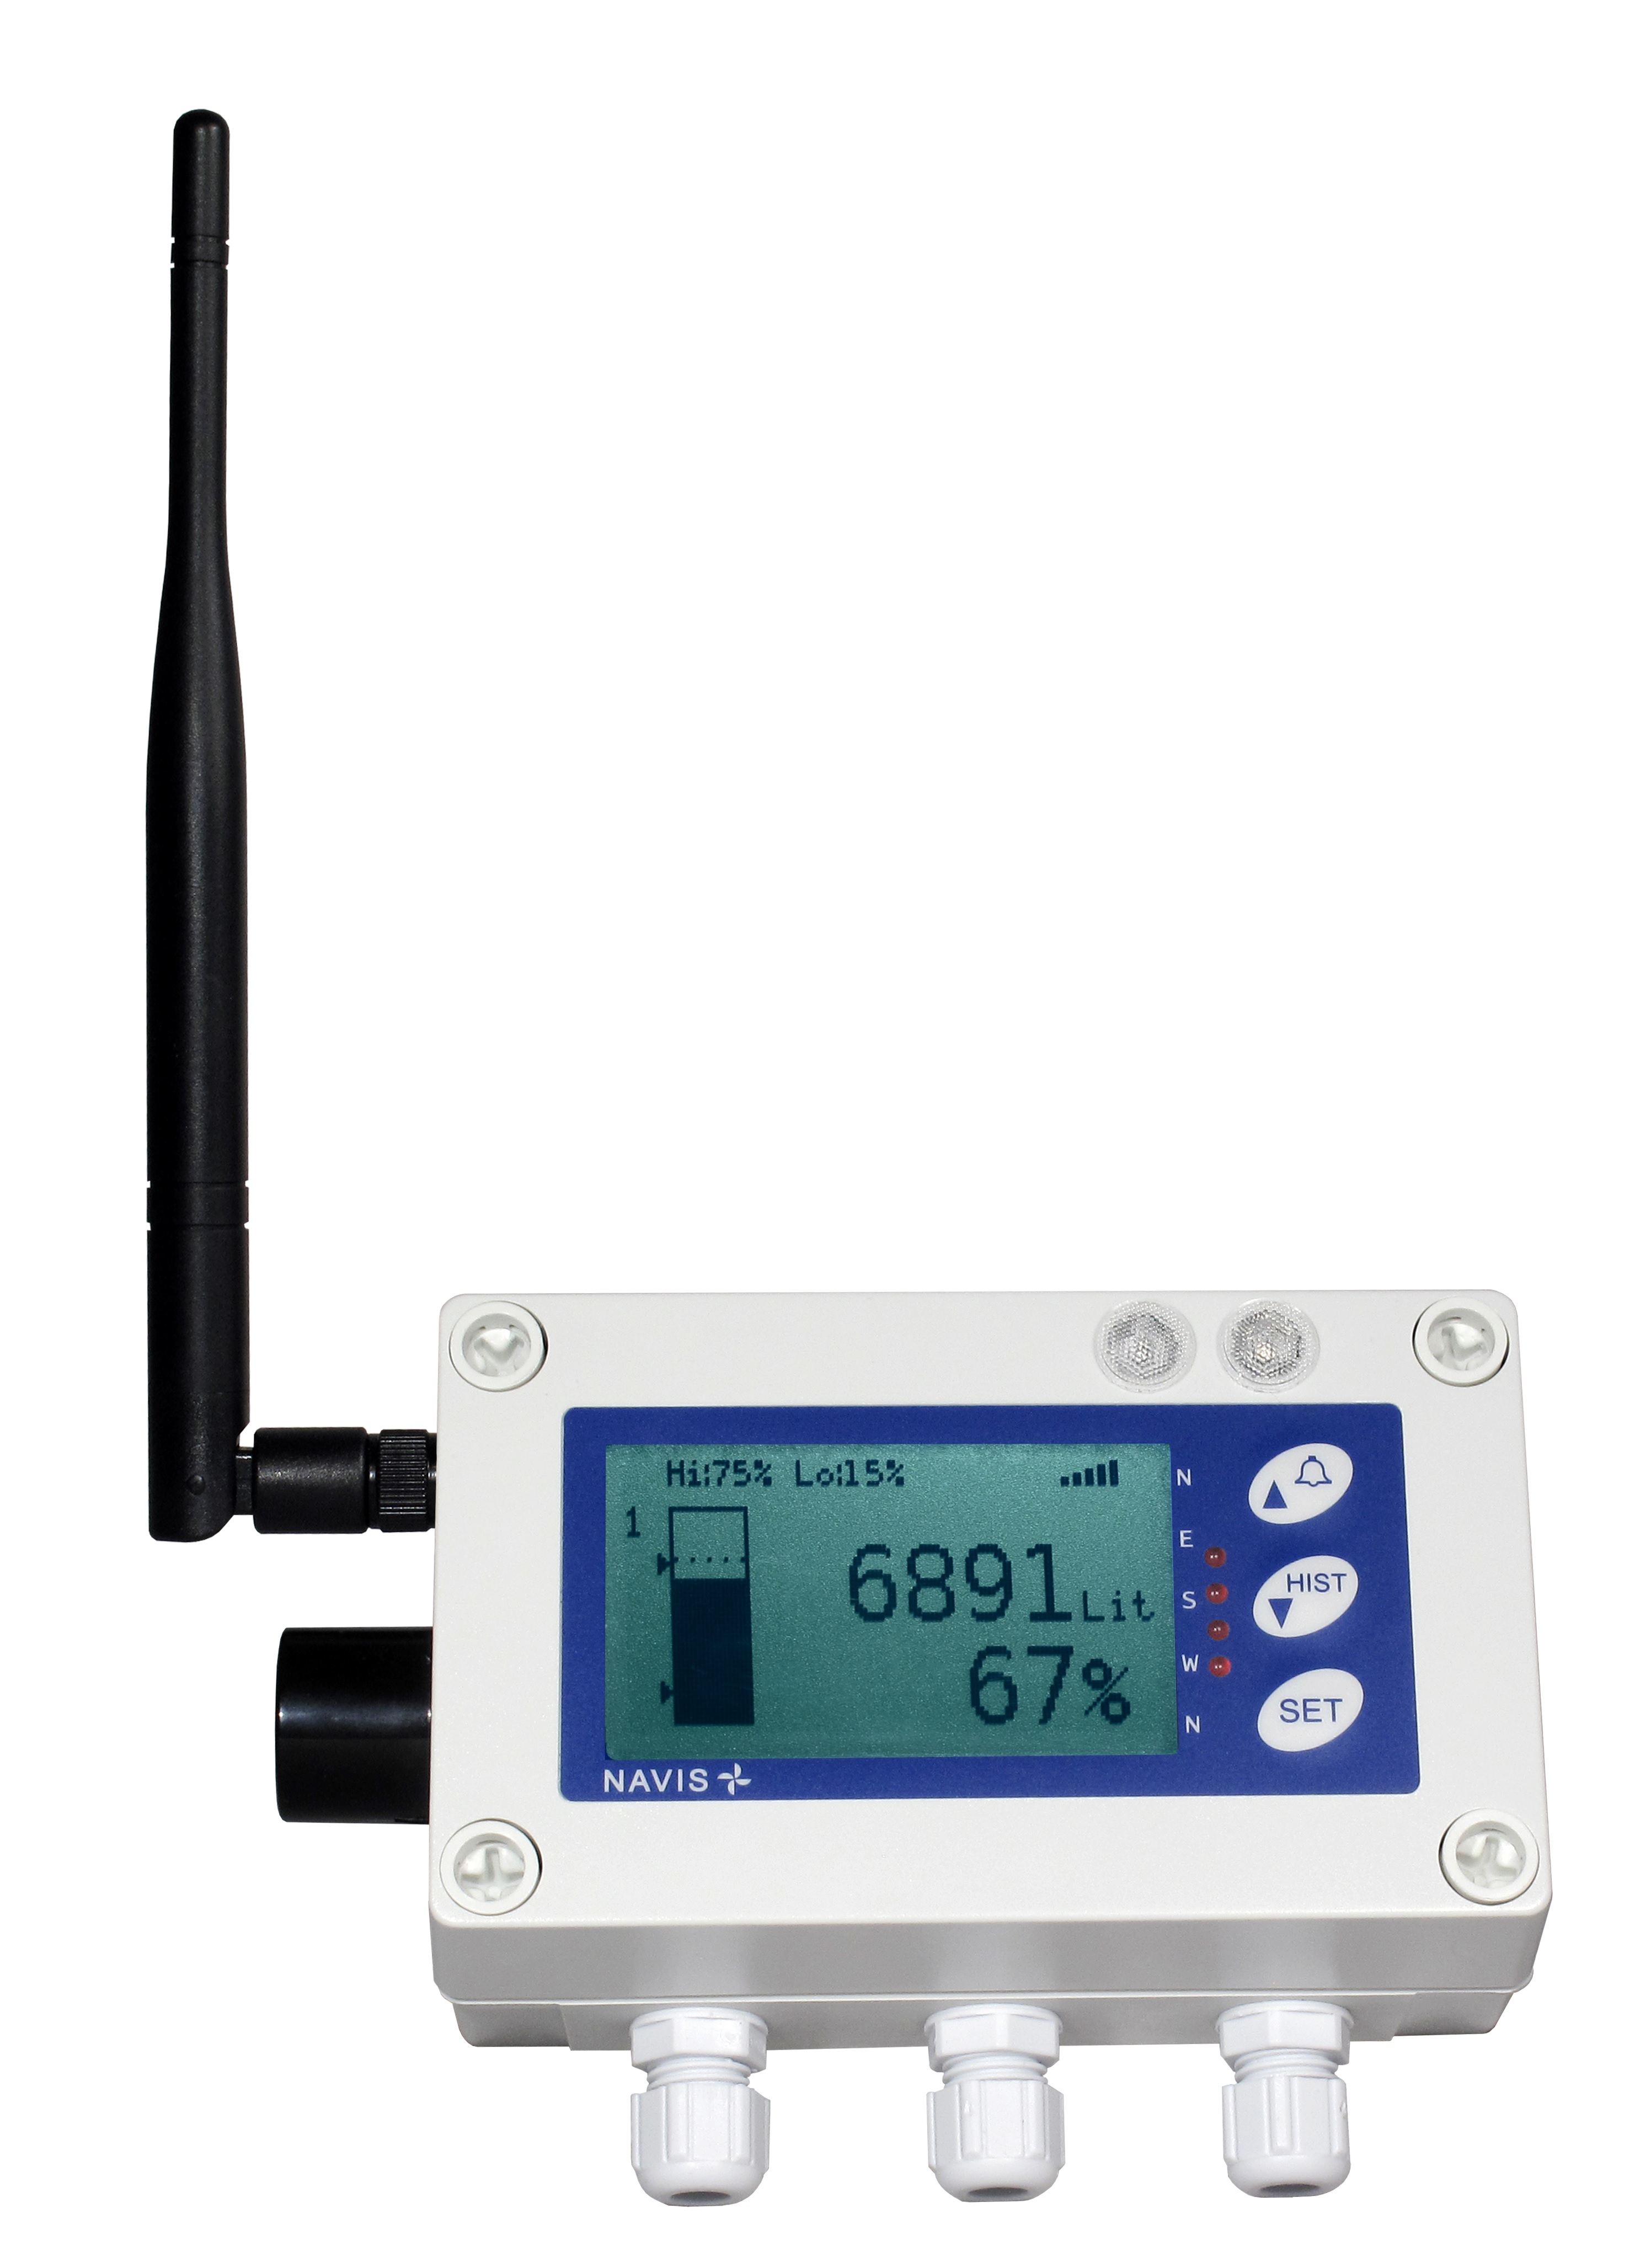 LW410 - LONG RANGE WIRELESS TANK LEVEL MONITOR WITH ALARMS AND LOGGING